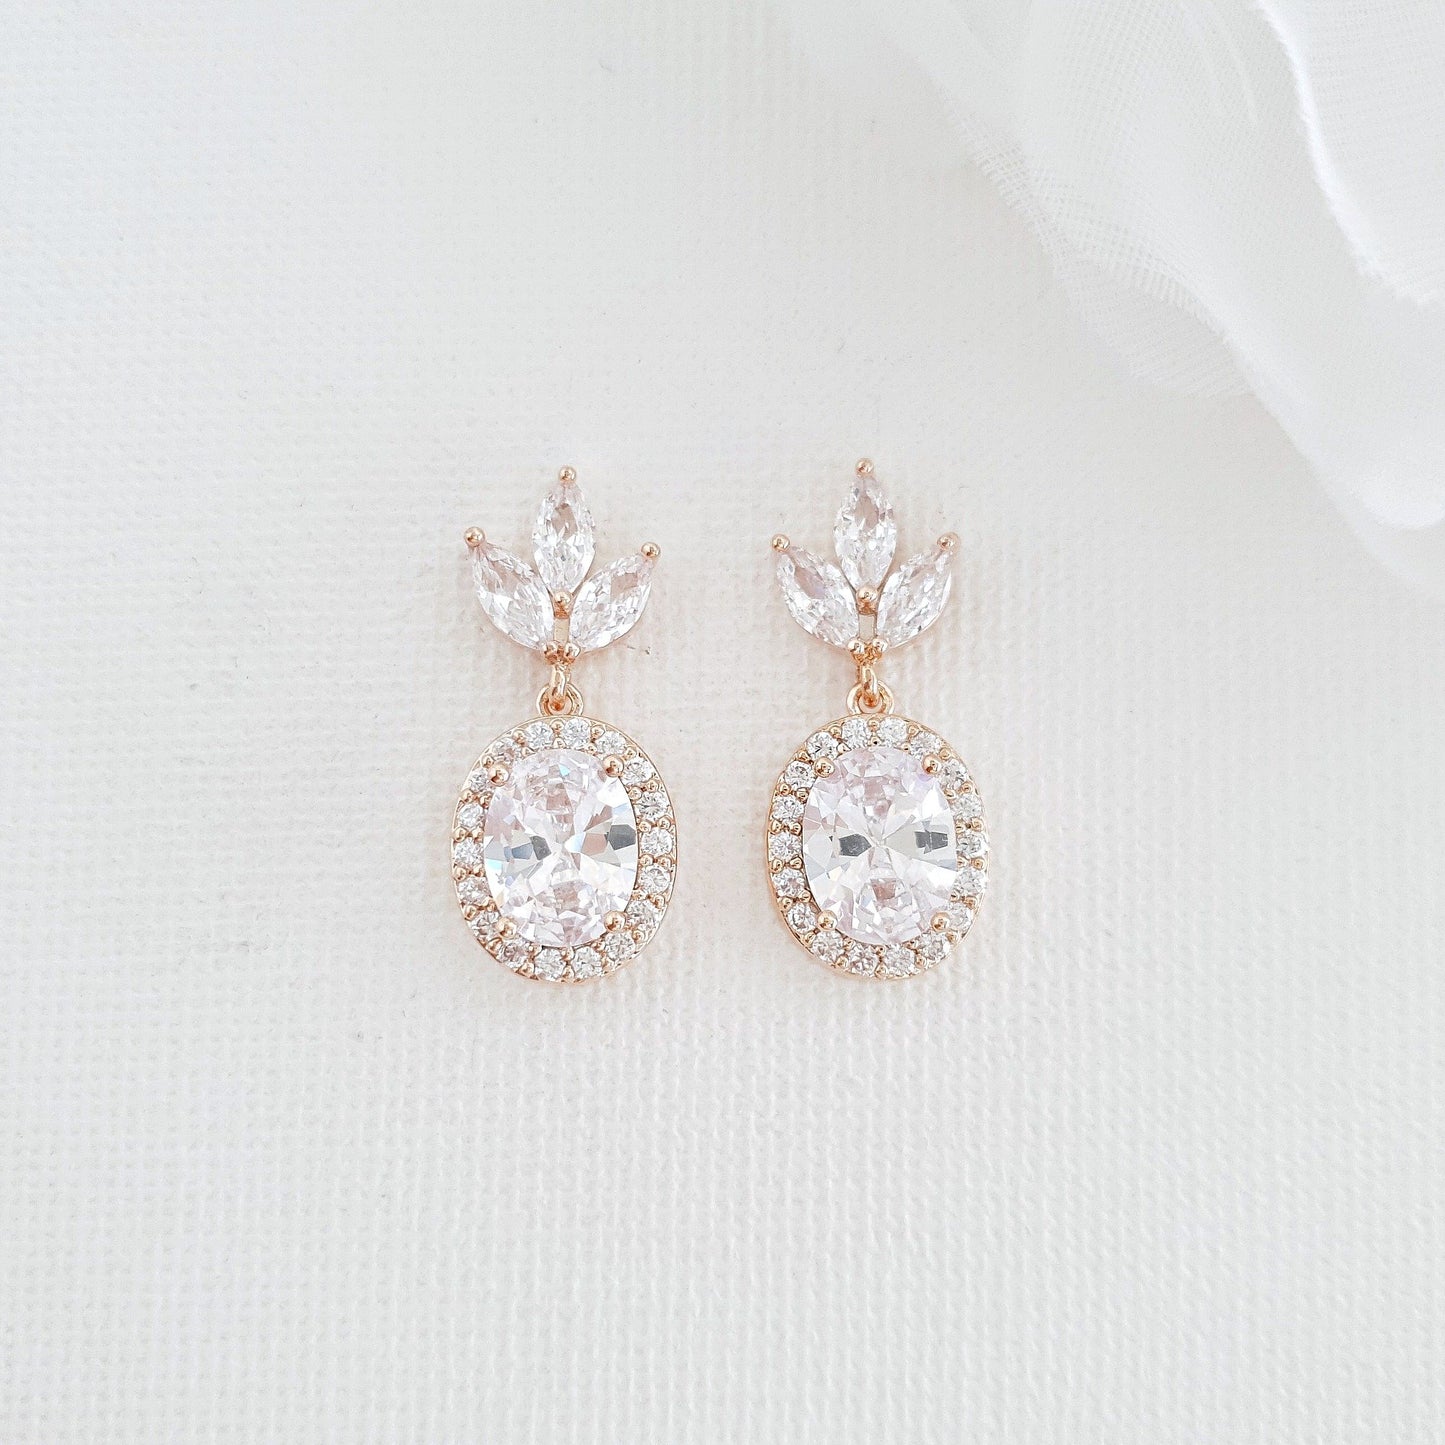 Small Bridal Earrings With Oval Crystals & Rose Gold- Emily - PoetryDesigns